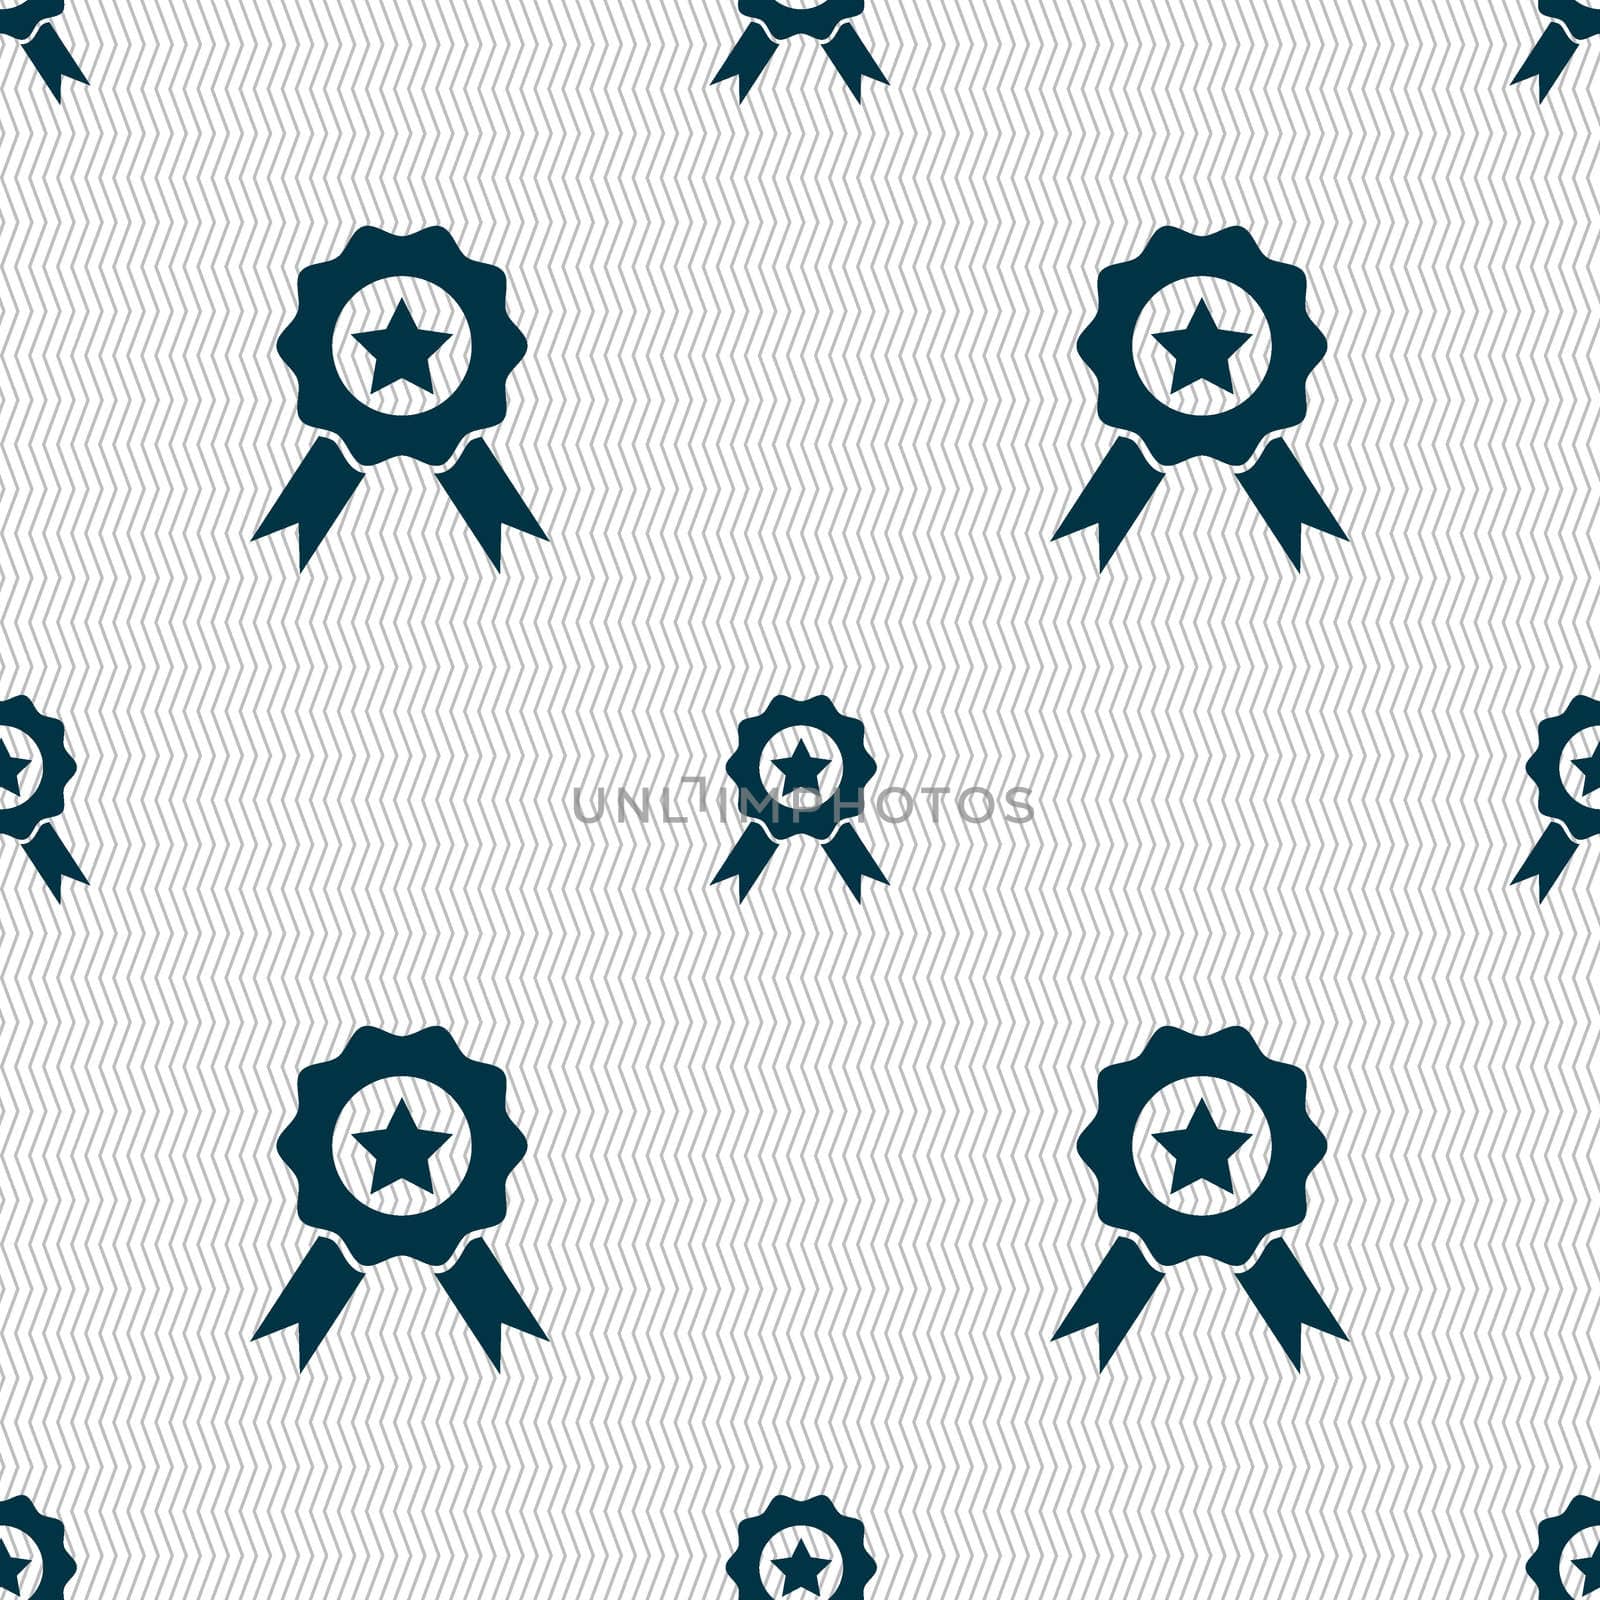 Award, Medal of Honor icon sign. Seamless abstract background with geometric shapes. illustration